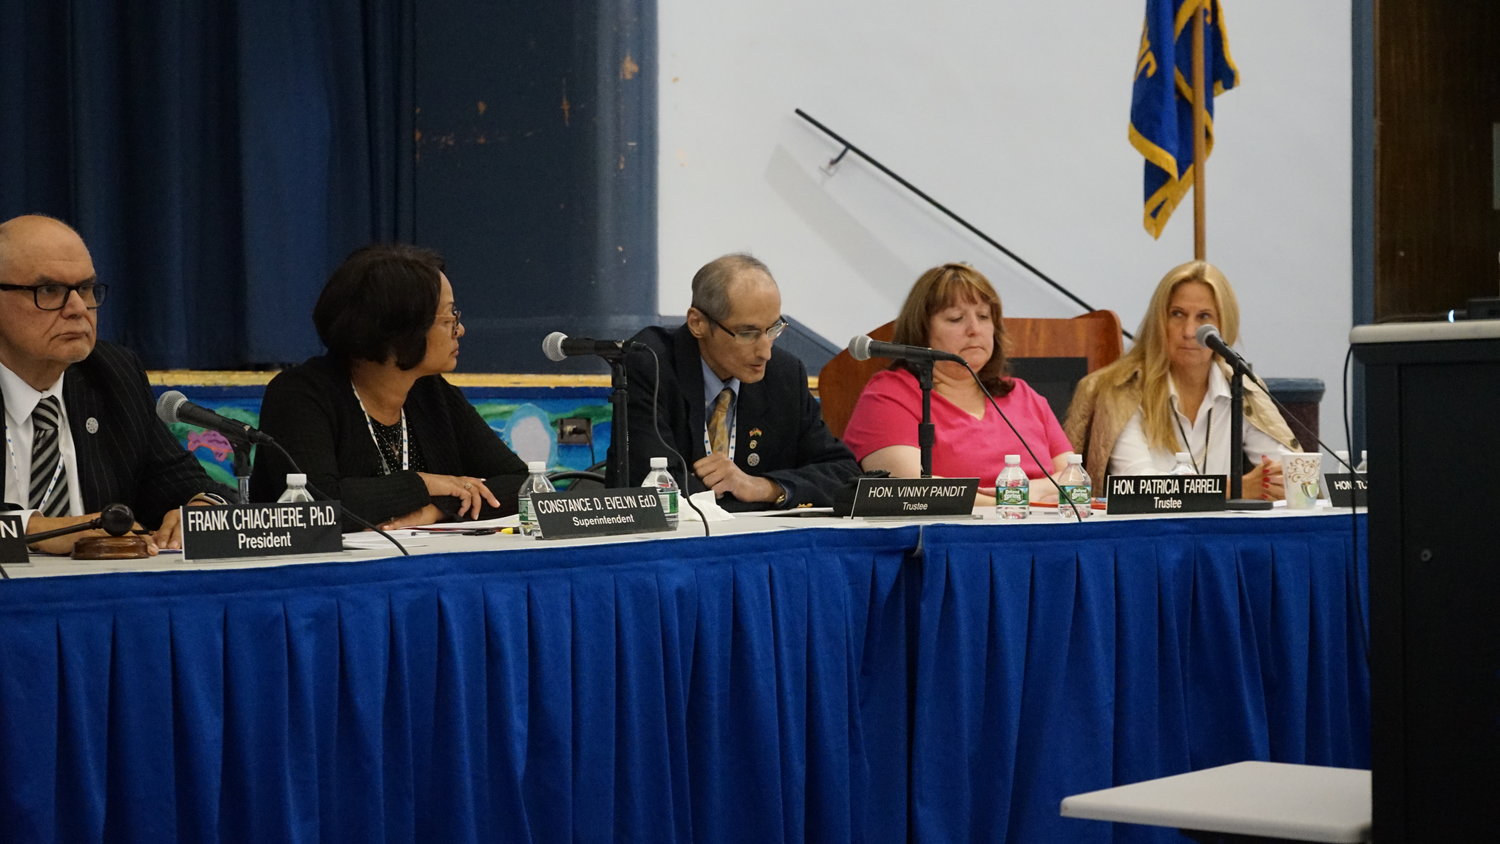 District 13 School Board Trustee Vinny Pandit, second from left, is under fire for comments he made on Facebook that members of the Hispanic community considered racist.